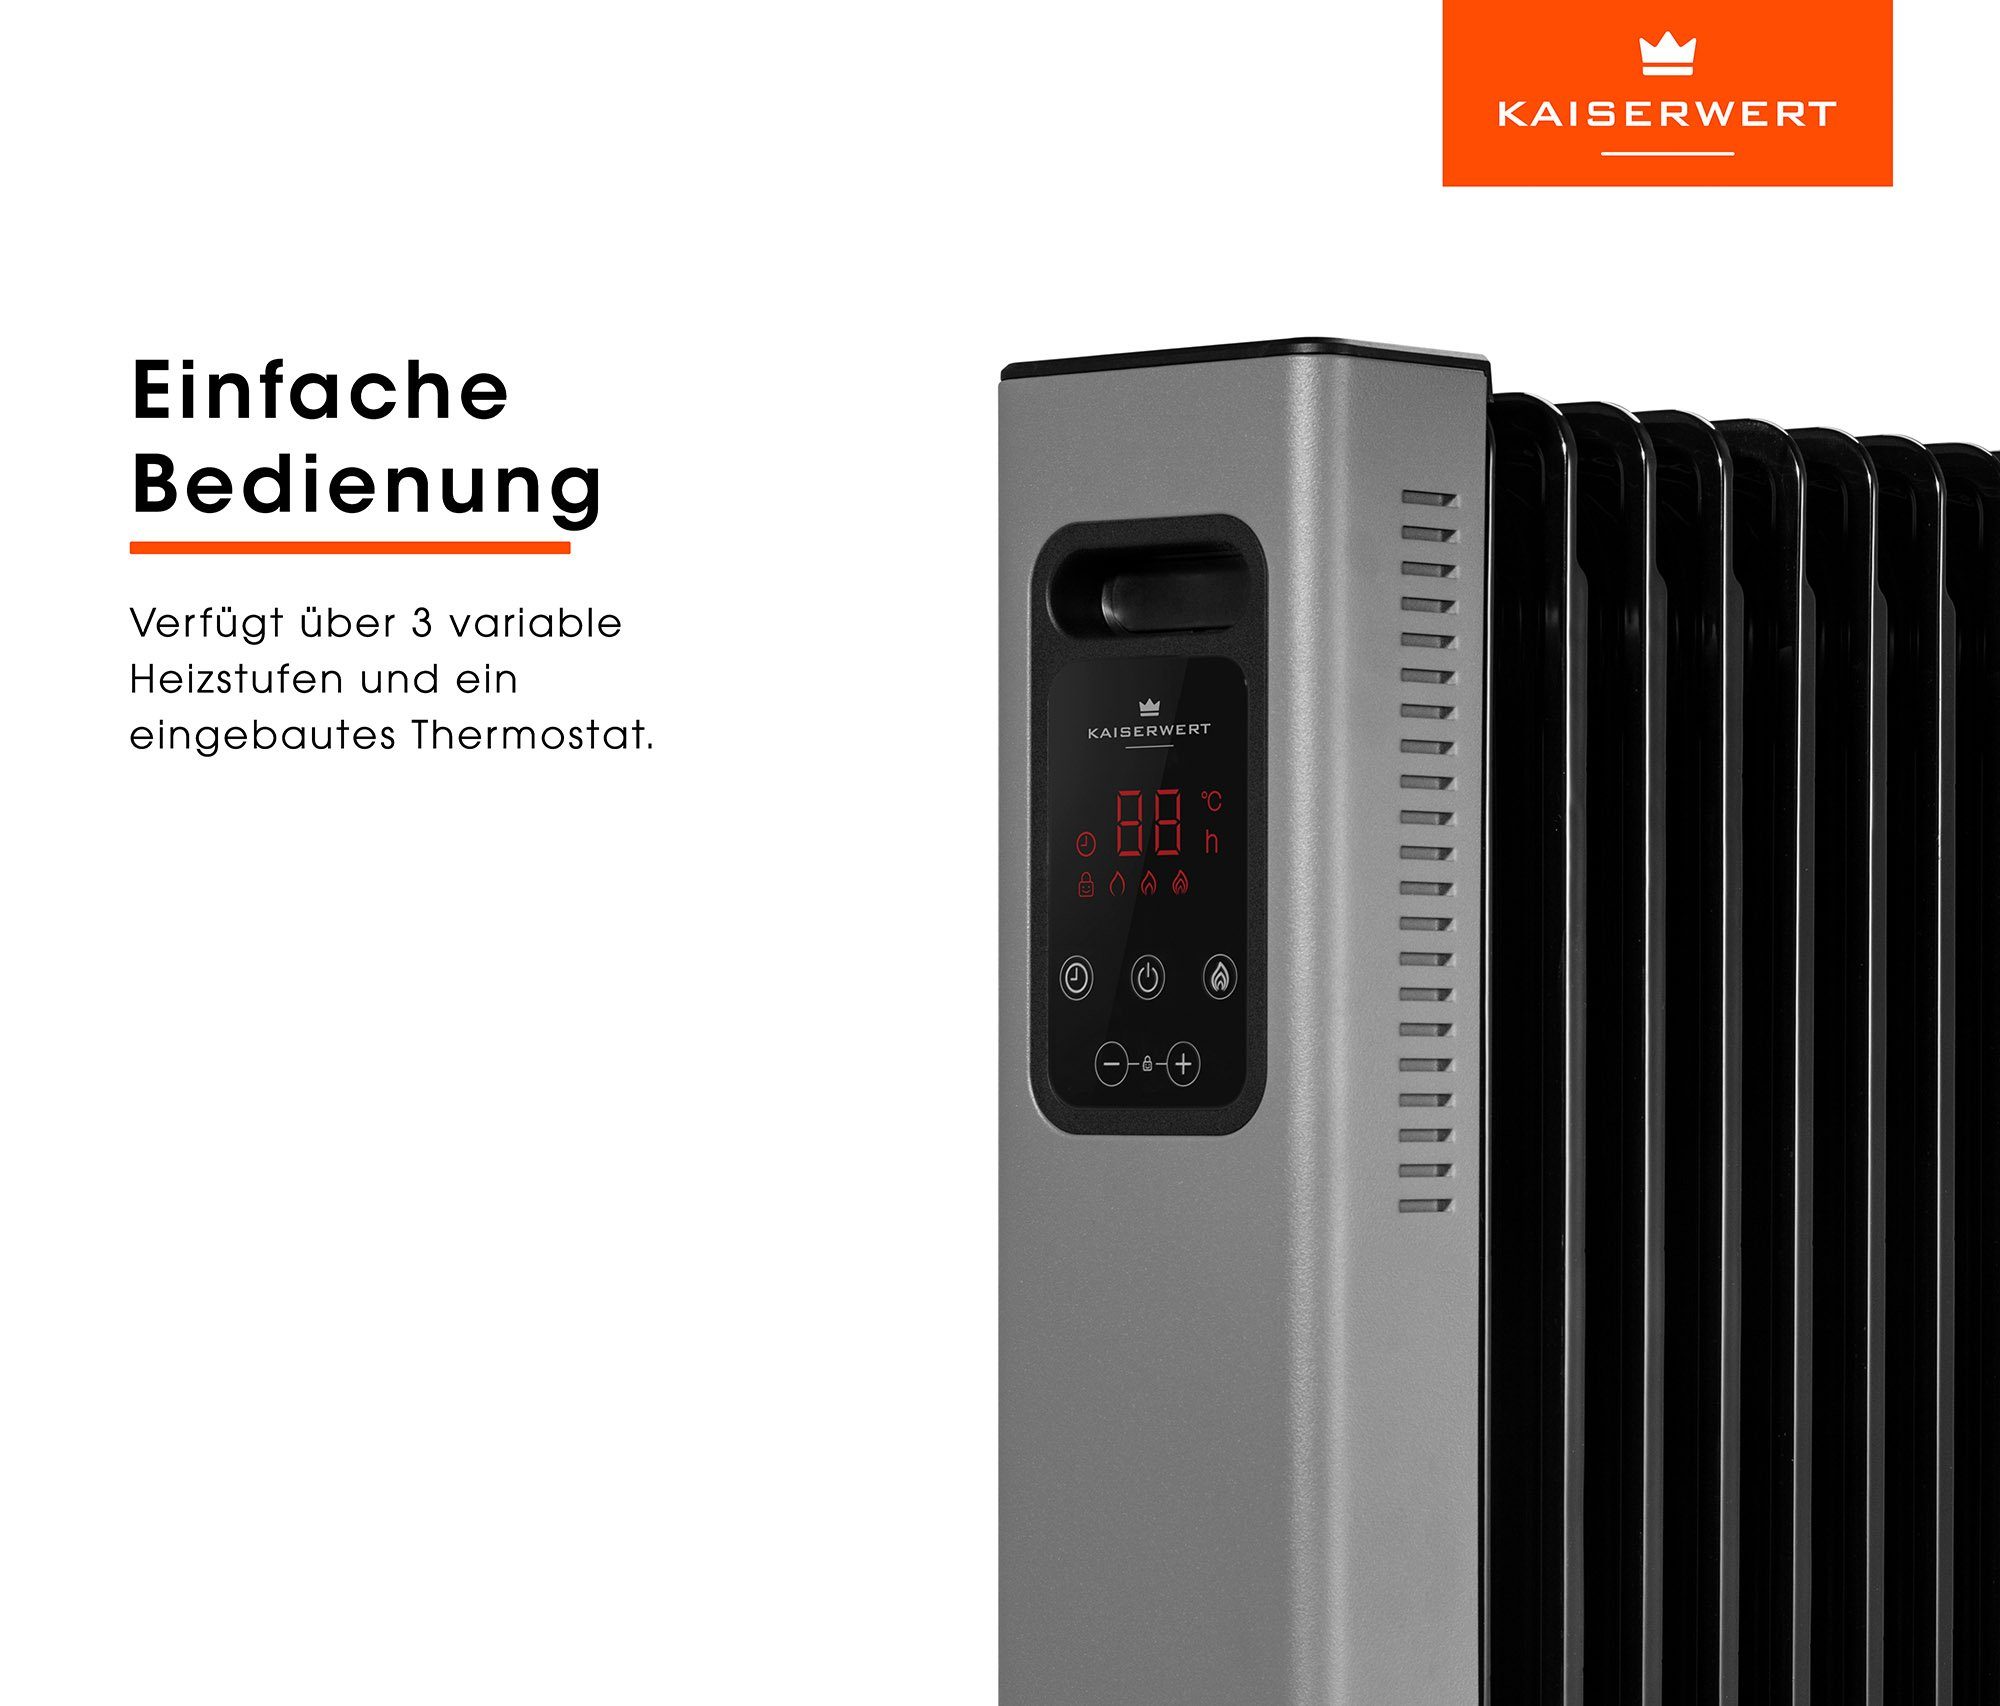 Kaiserwert Ölradiator Deluxe, 2500 W, Memory-Funktion Rippen, 11 Touch-Display, Thermostat, 24h-Timer